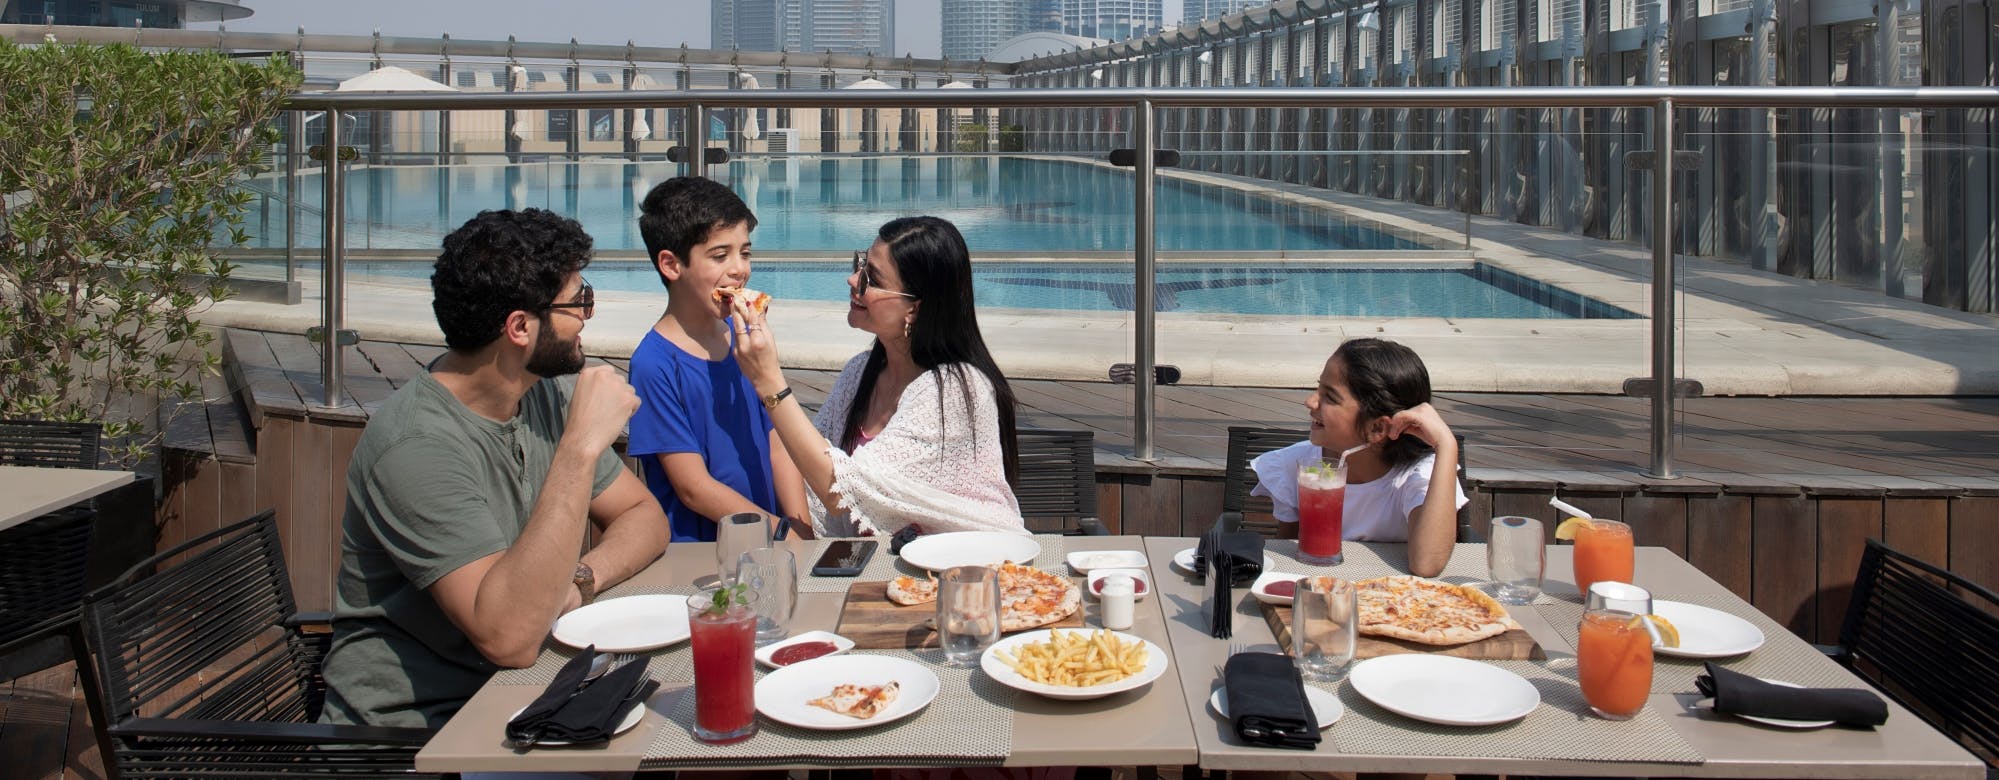 Burj Khalifa tickets and 3 course meal at Rooftop Musement